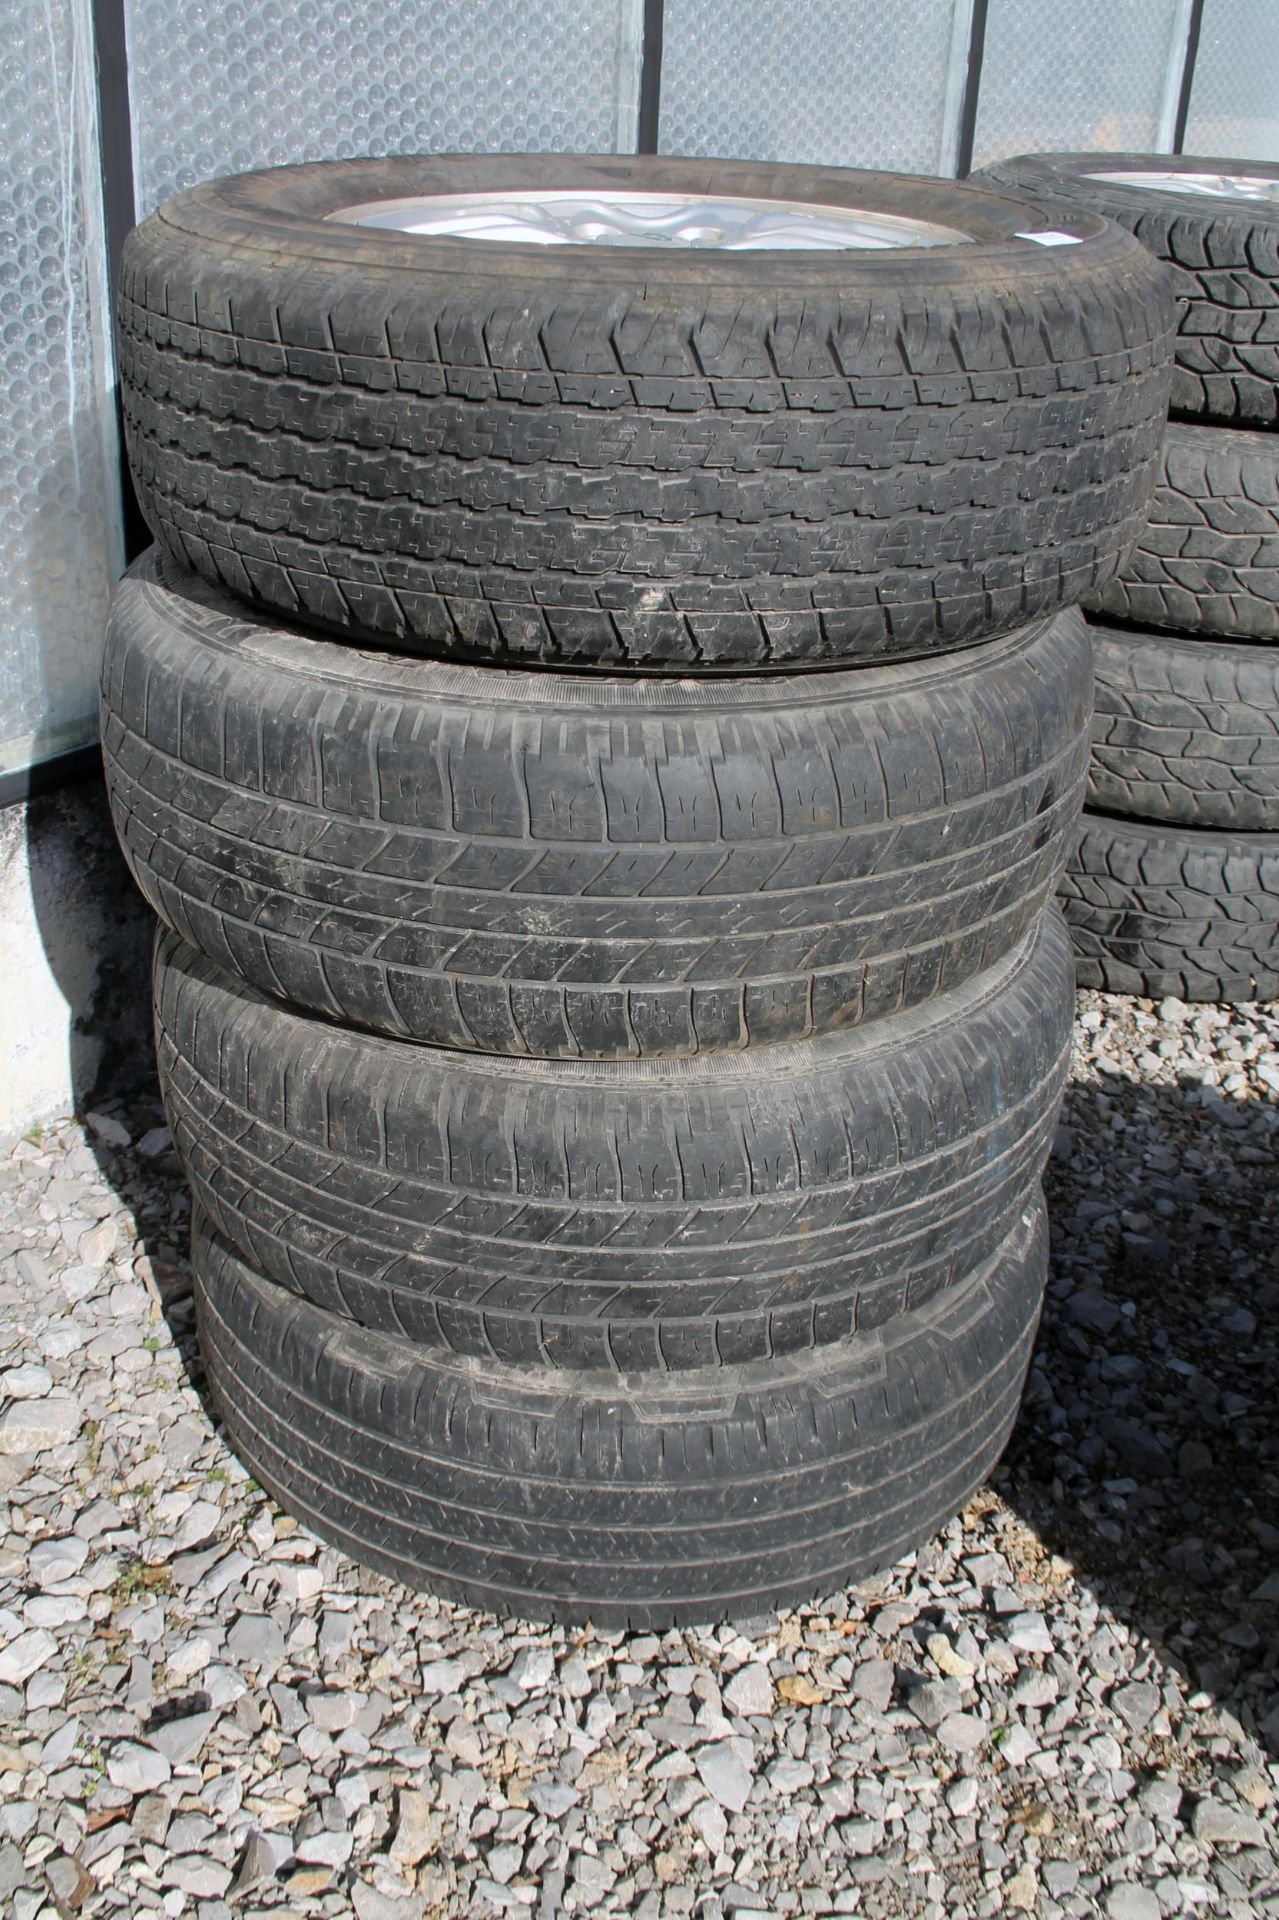 4 LAND ROVER WHEELS AND TYRES 255/65-R17 NO VAT